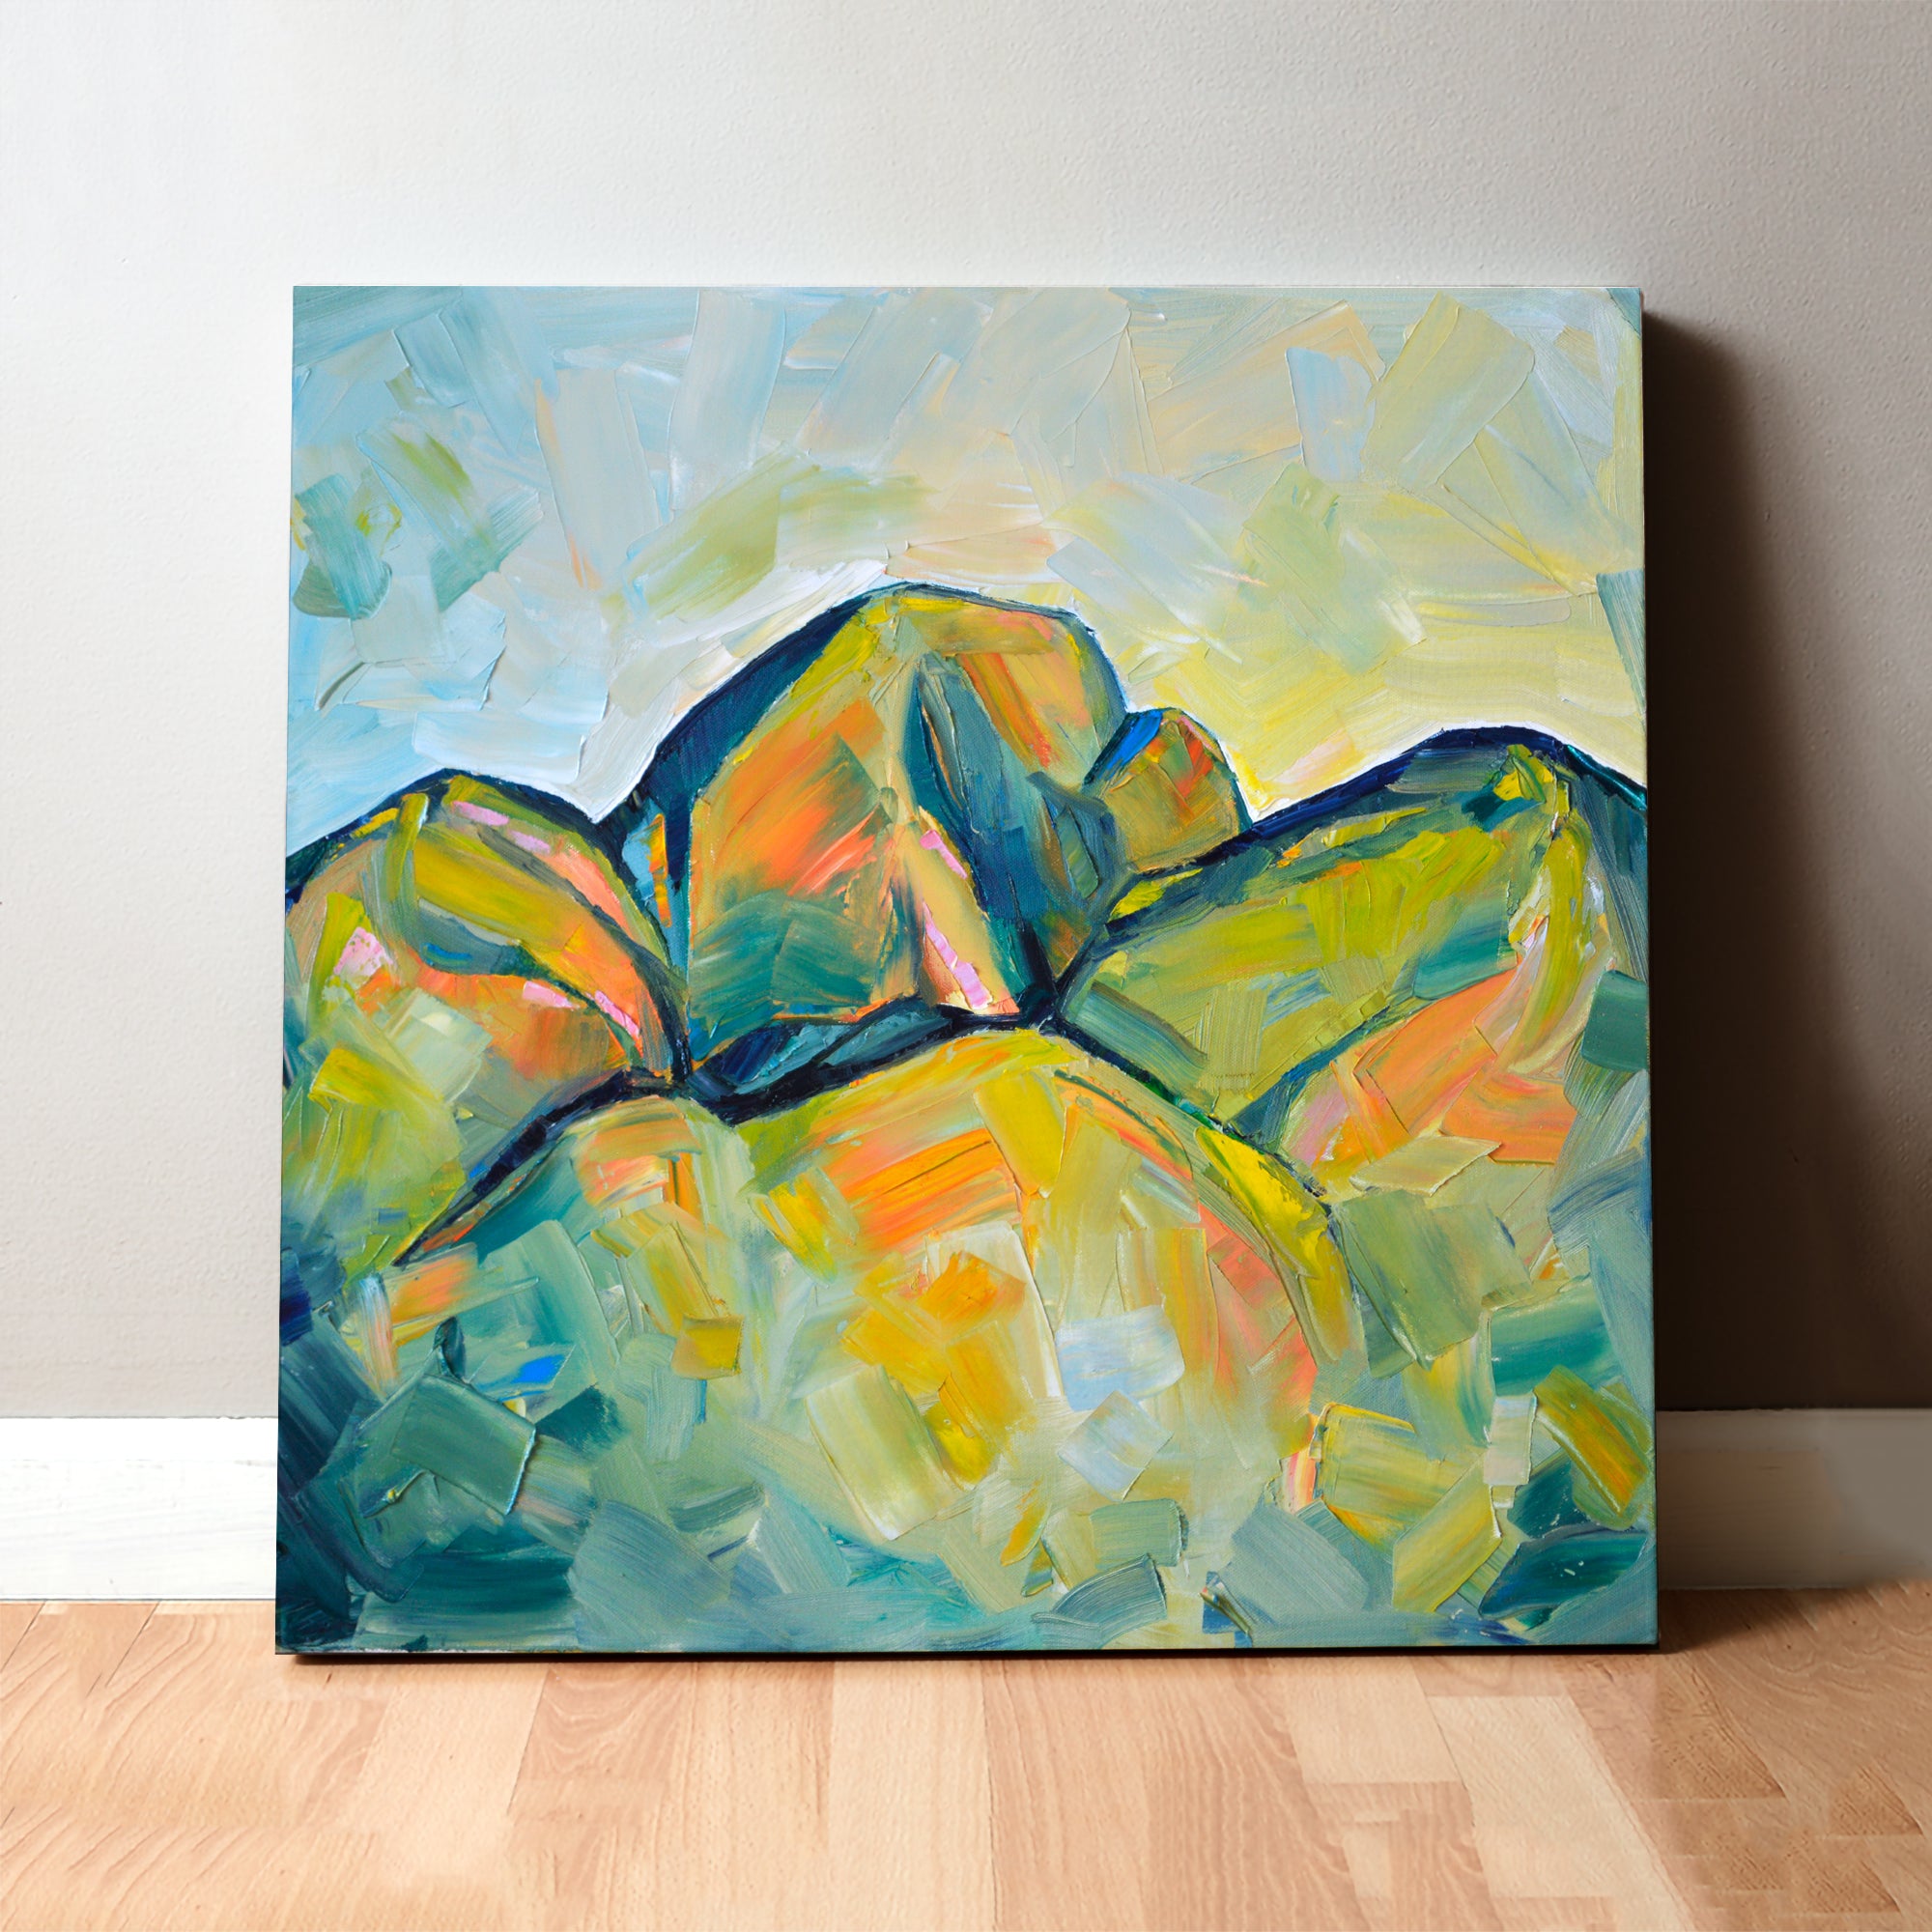 Oil painting of an abstract molar tooth painted to look like mountains. The canvas painting leans on a gray wall.